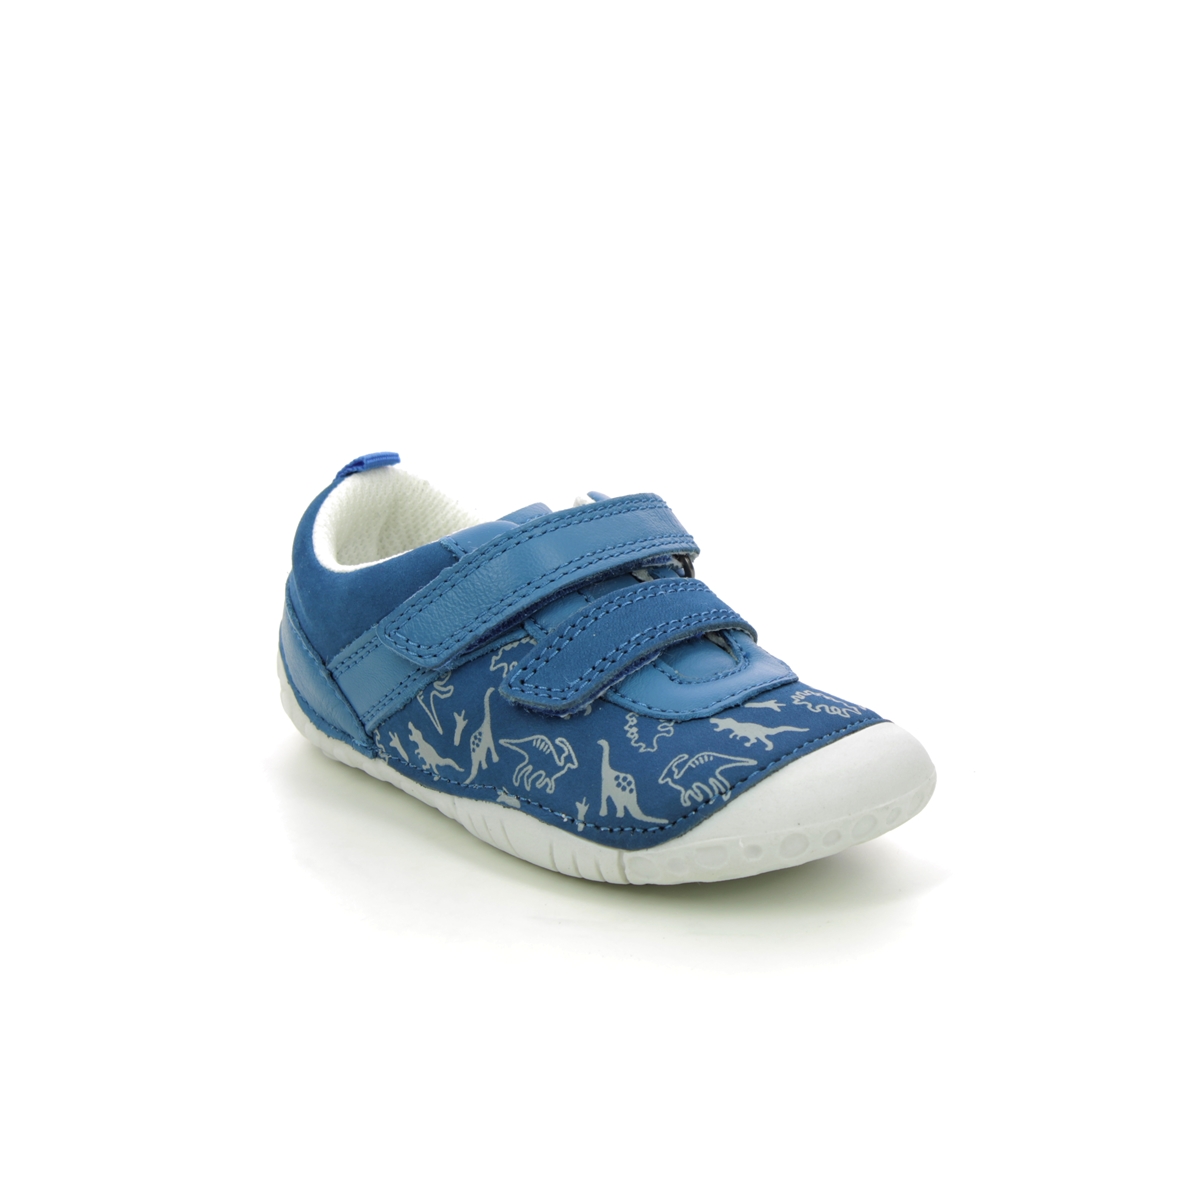 Start Rite - Roar 2V In Blue Nubuck 0767-26F In Size 2.5 In Plain Blue Nubuck Boys First And Toddler Shoes  In Blue Nubuck For kids